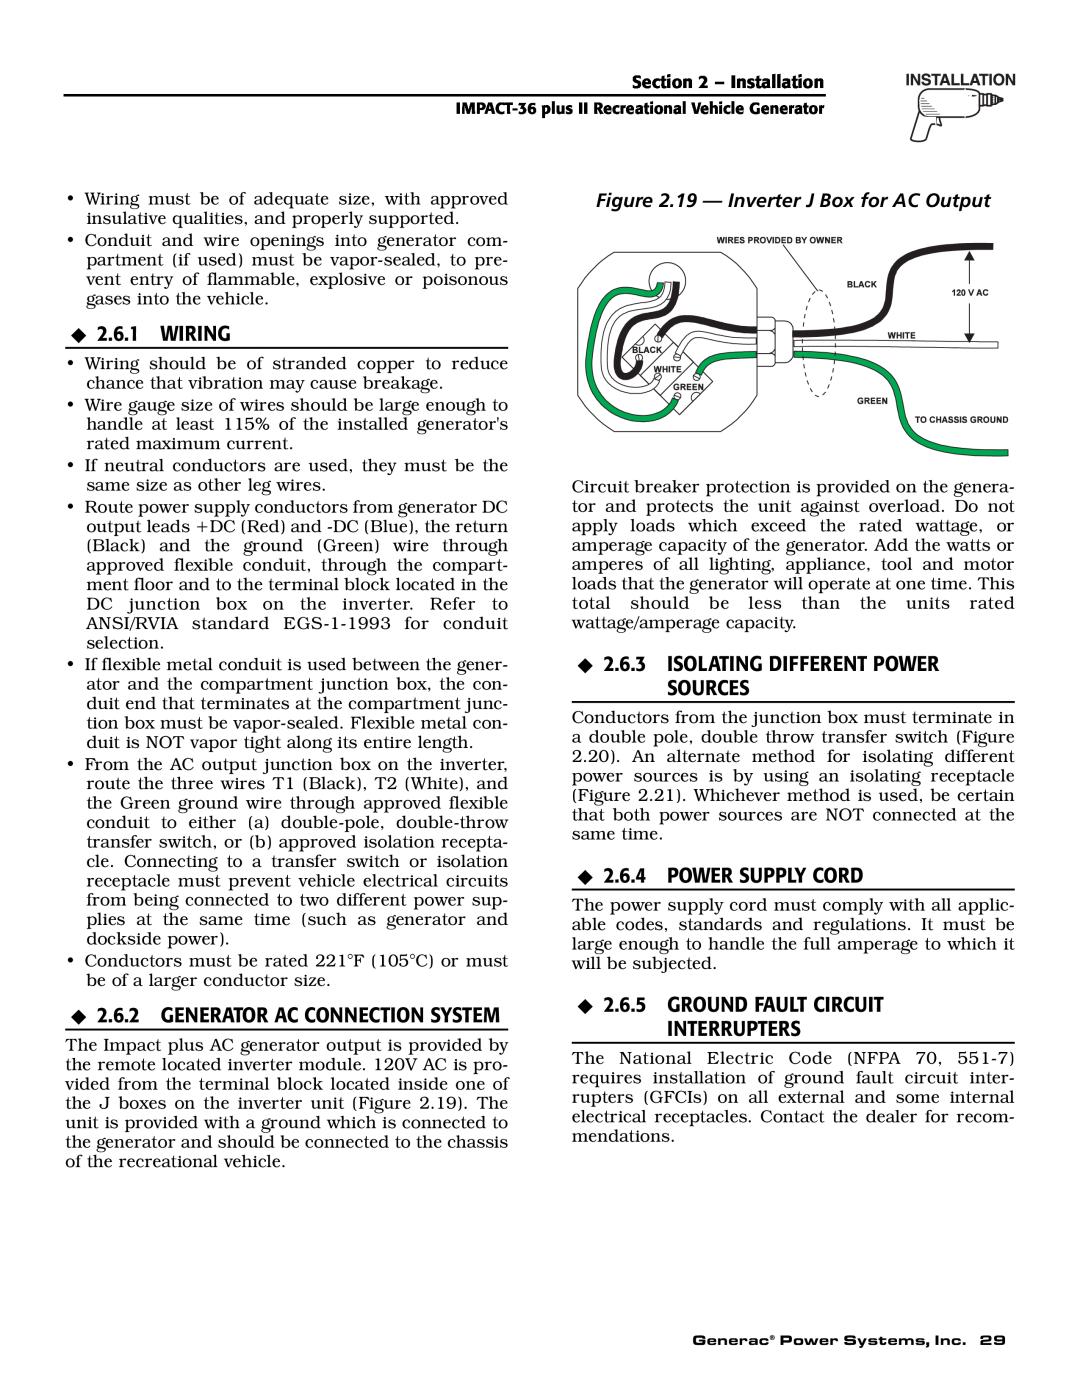 Generac 00941-3 owner manual Wiring, Isolating Different Power Sources, Power Supply Cord, Generator Ac Connection System 